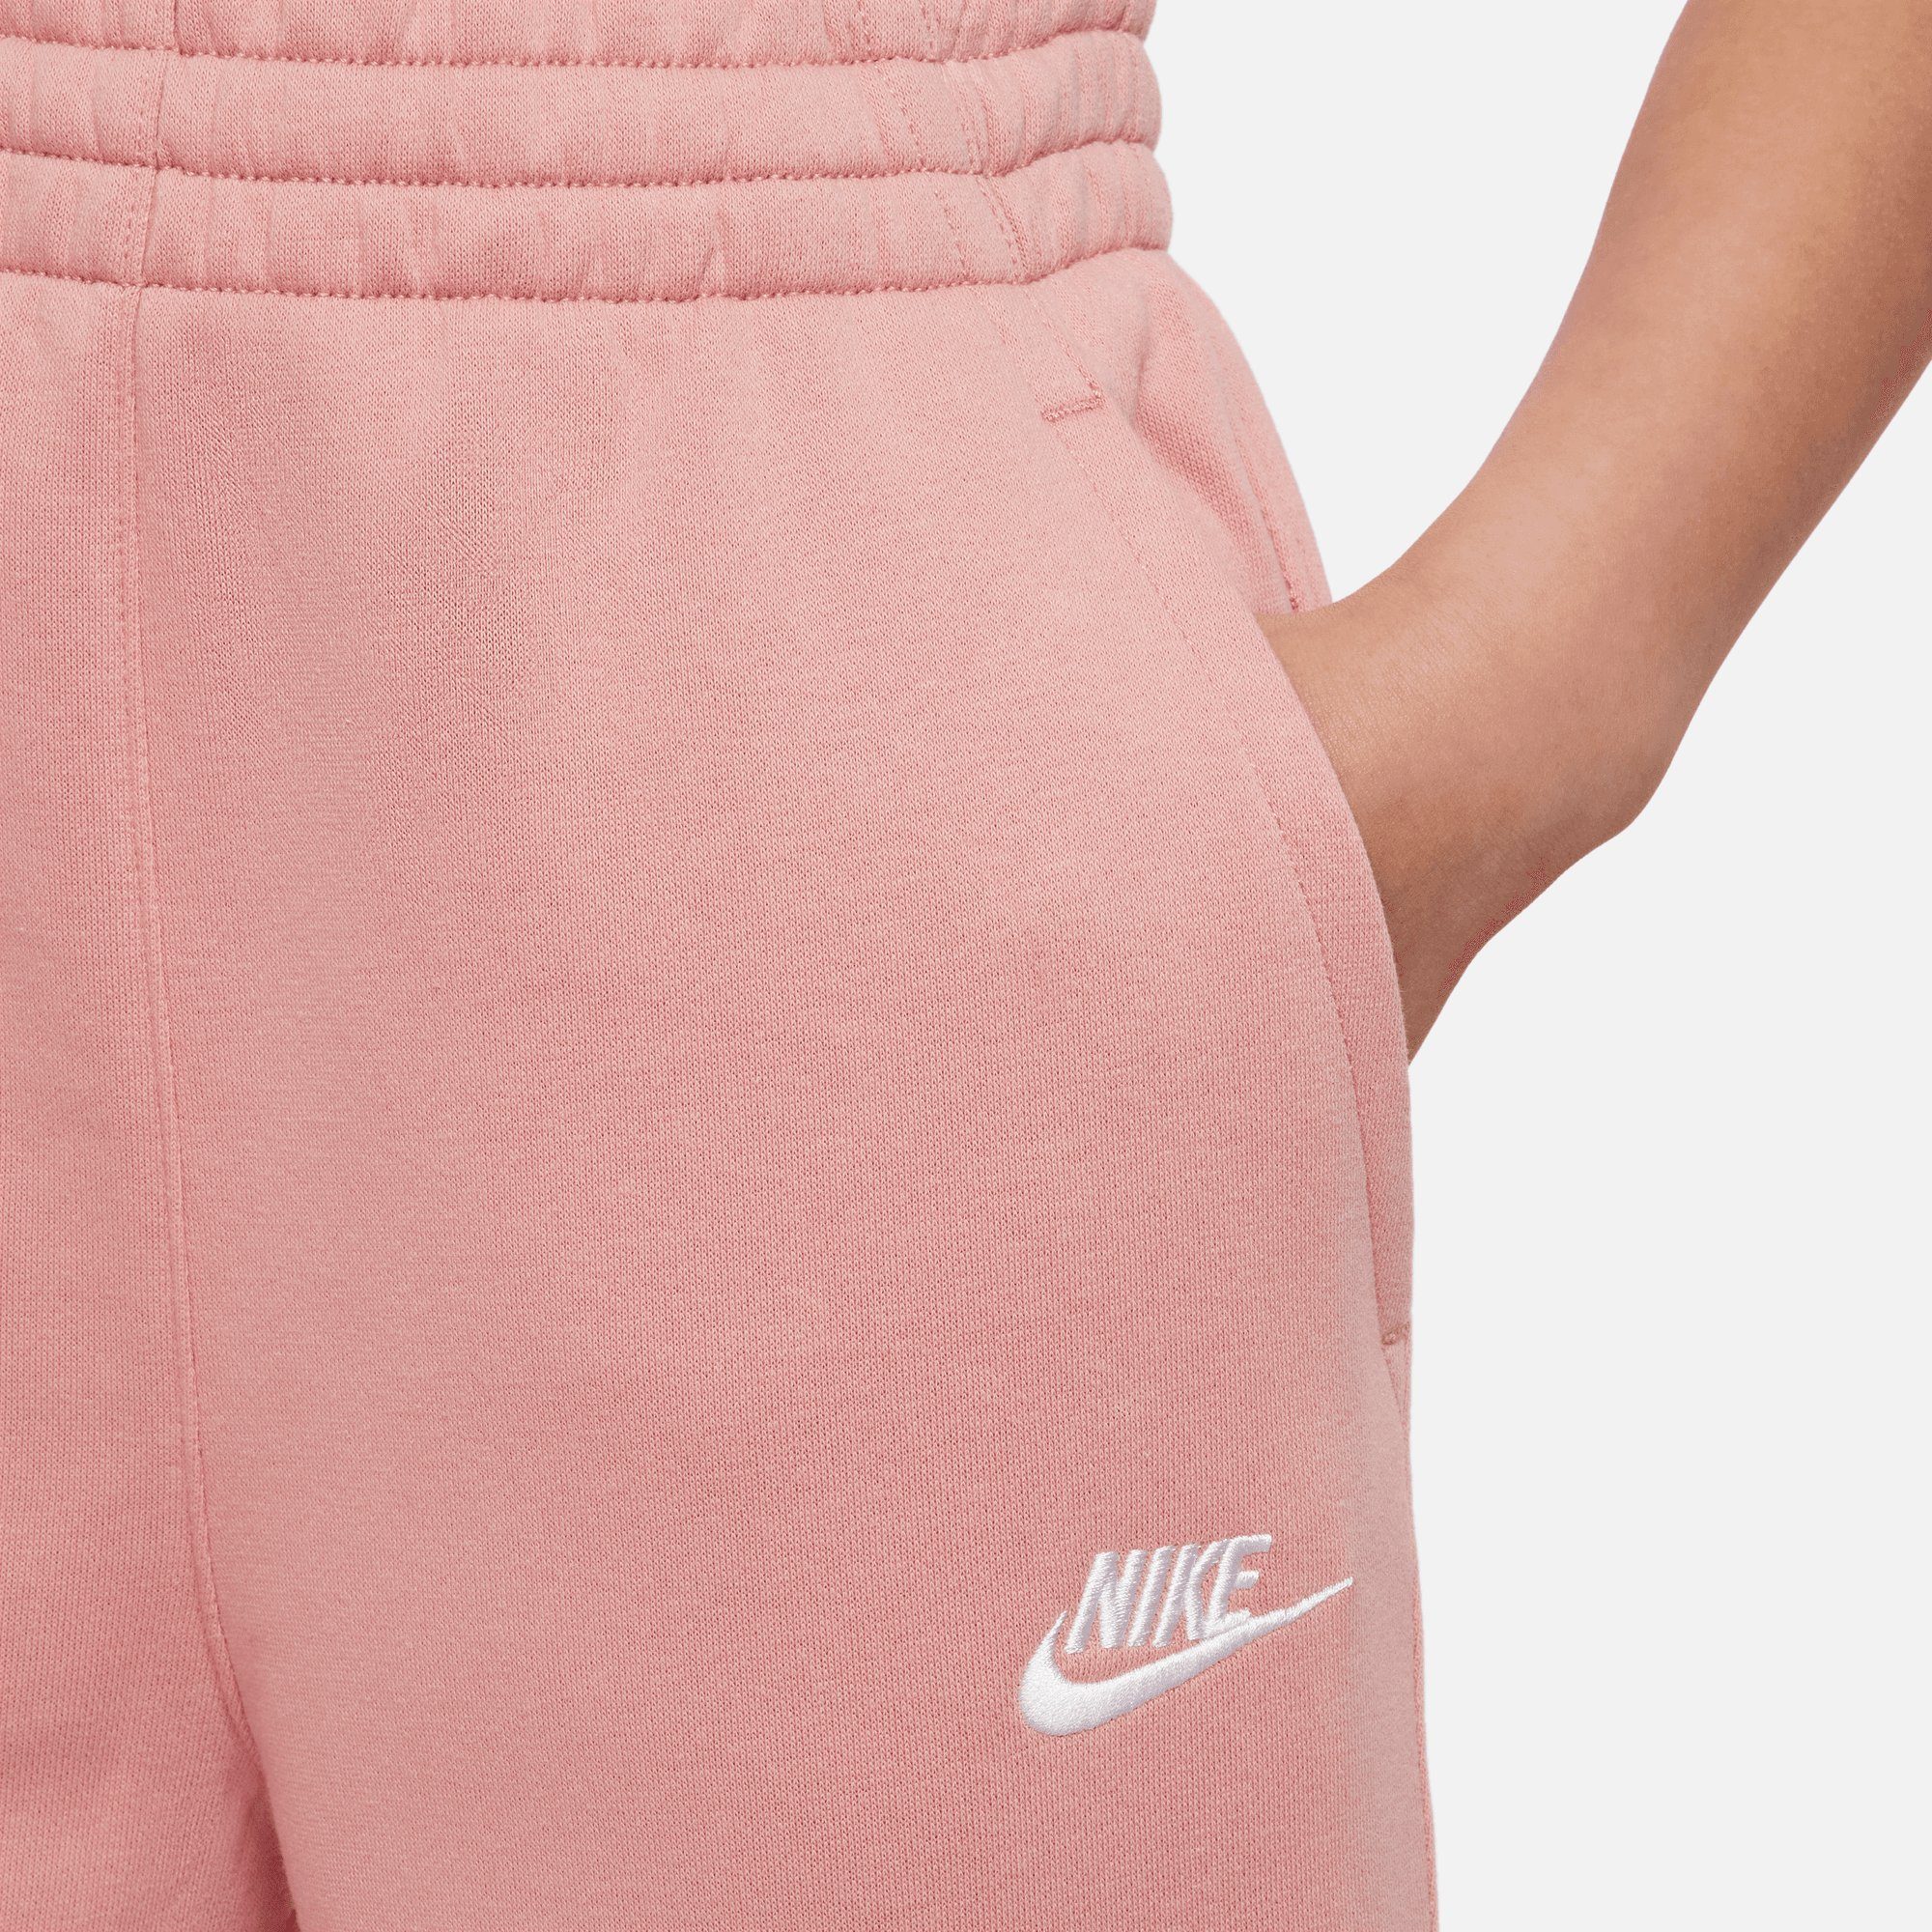 Nike Sportswear Jogginghose CLUB FLEECE KIDS' FITTED PANTS RED BIG STARDUST/WHITE (GIRLS) HIGH-WAISTED STARDUST/RED